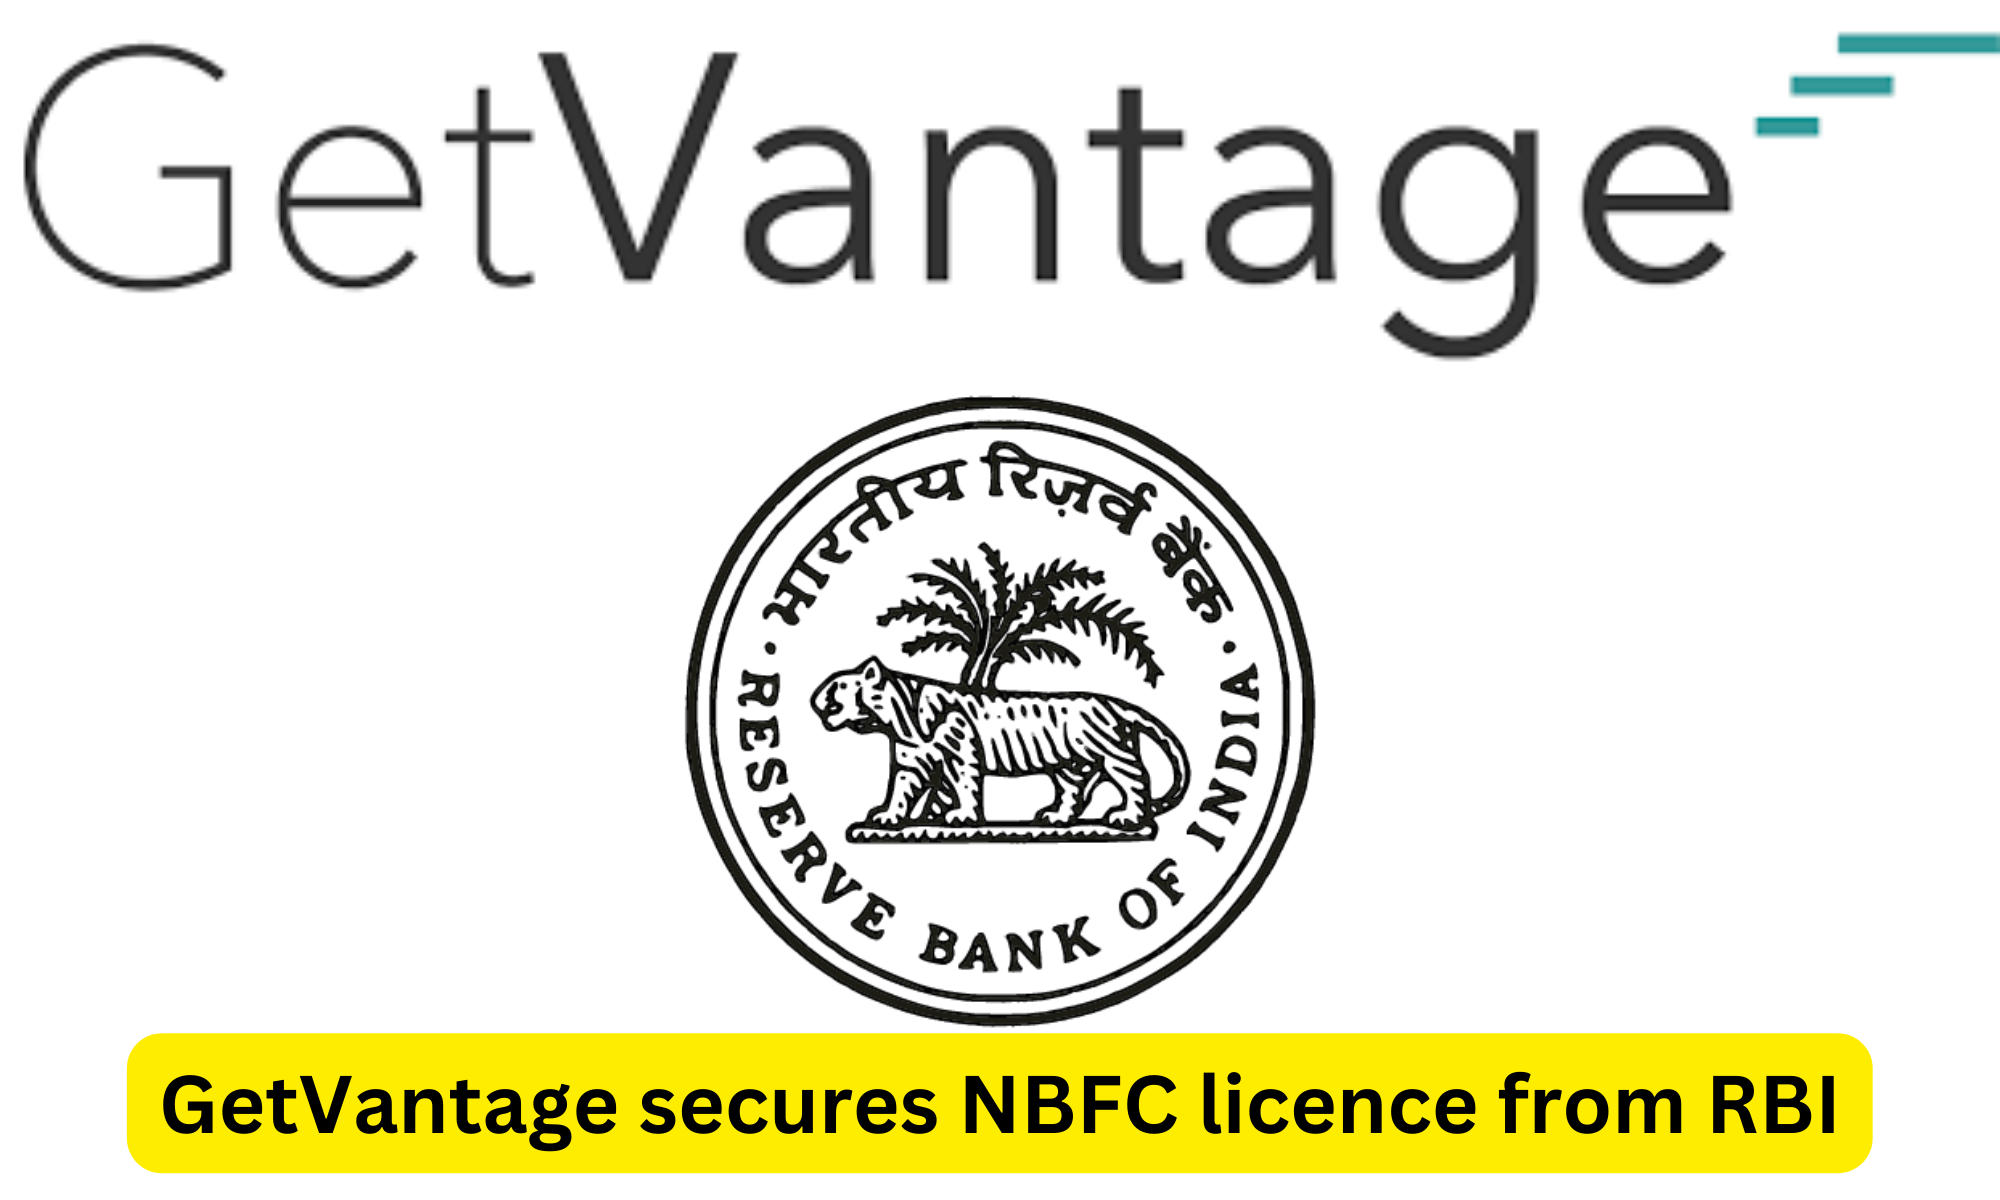 GetVantage secures NBFC licence from RBI